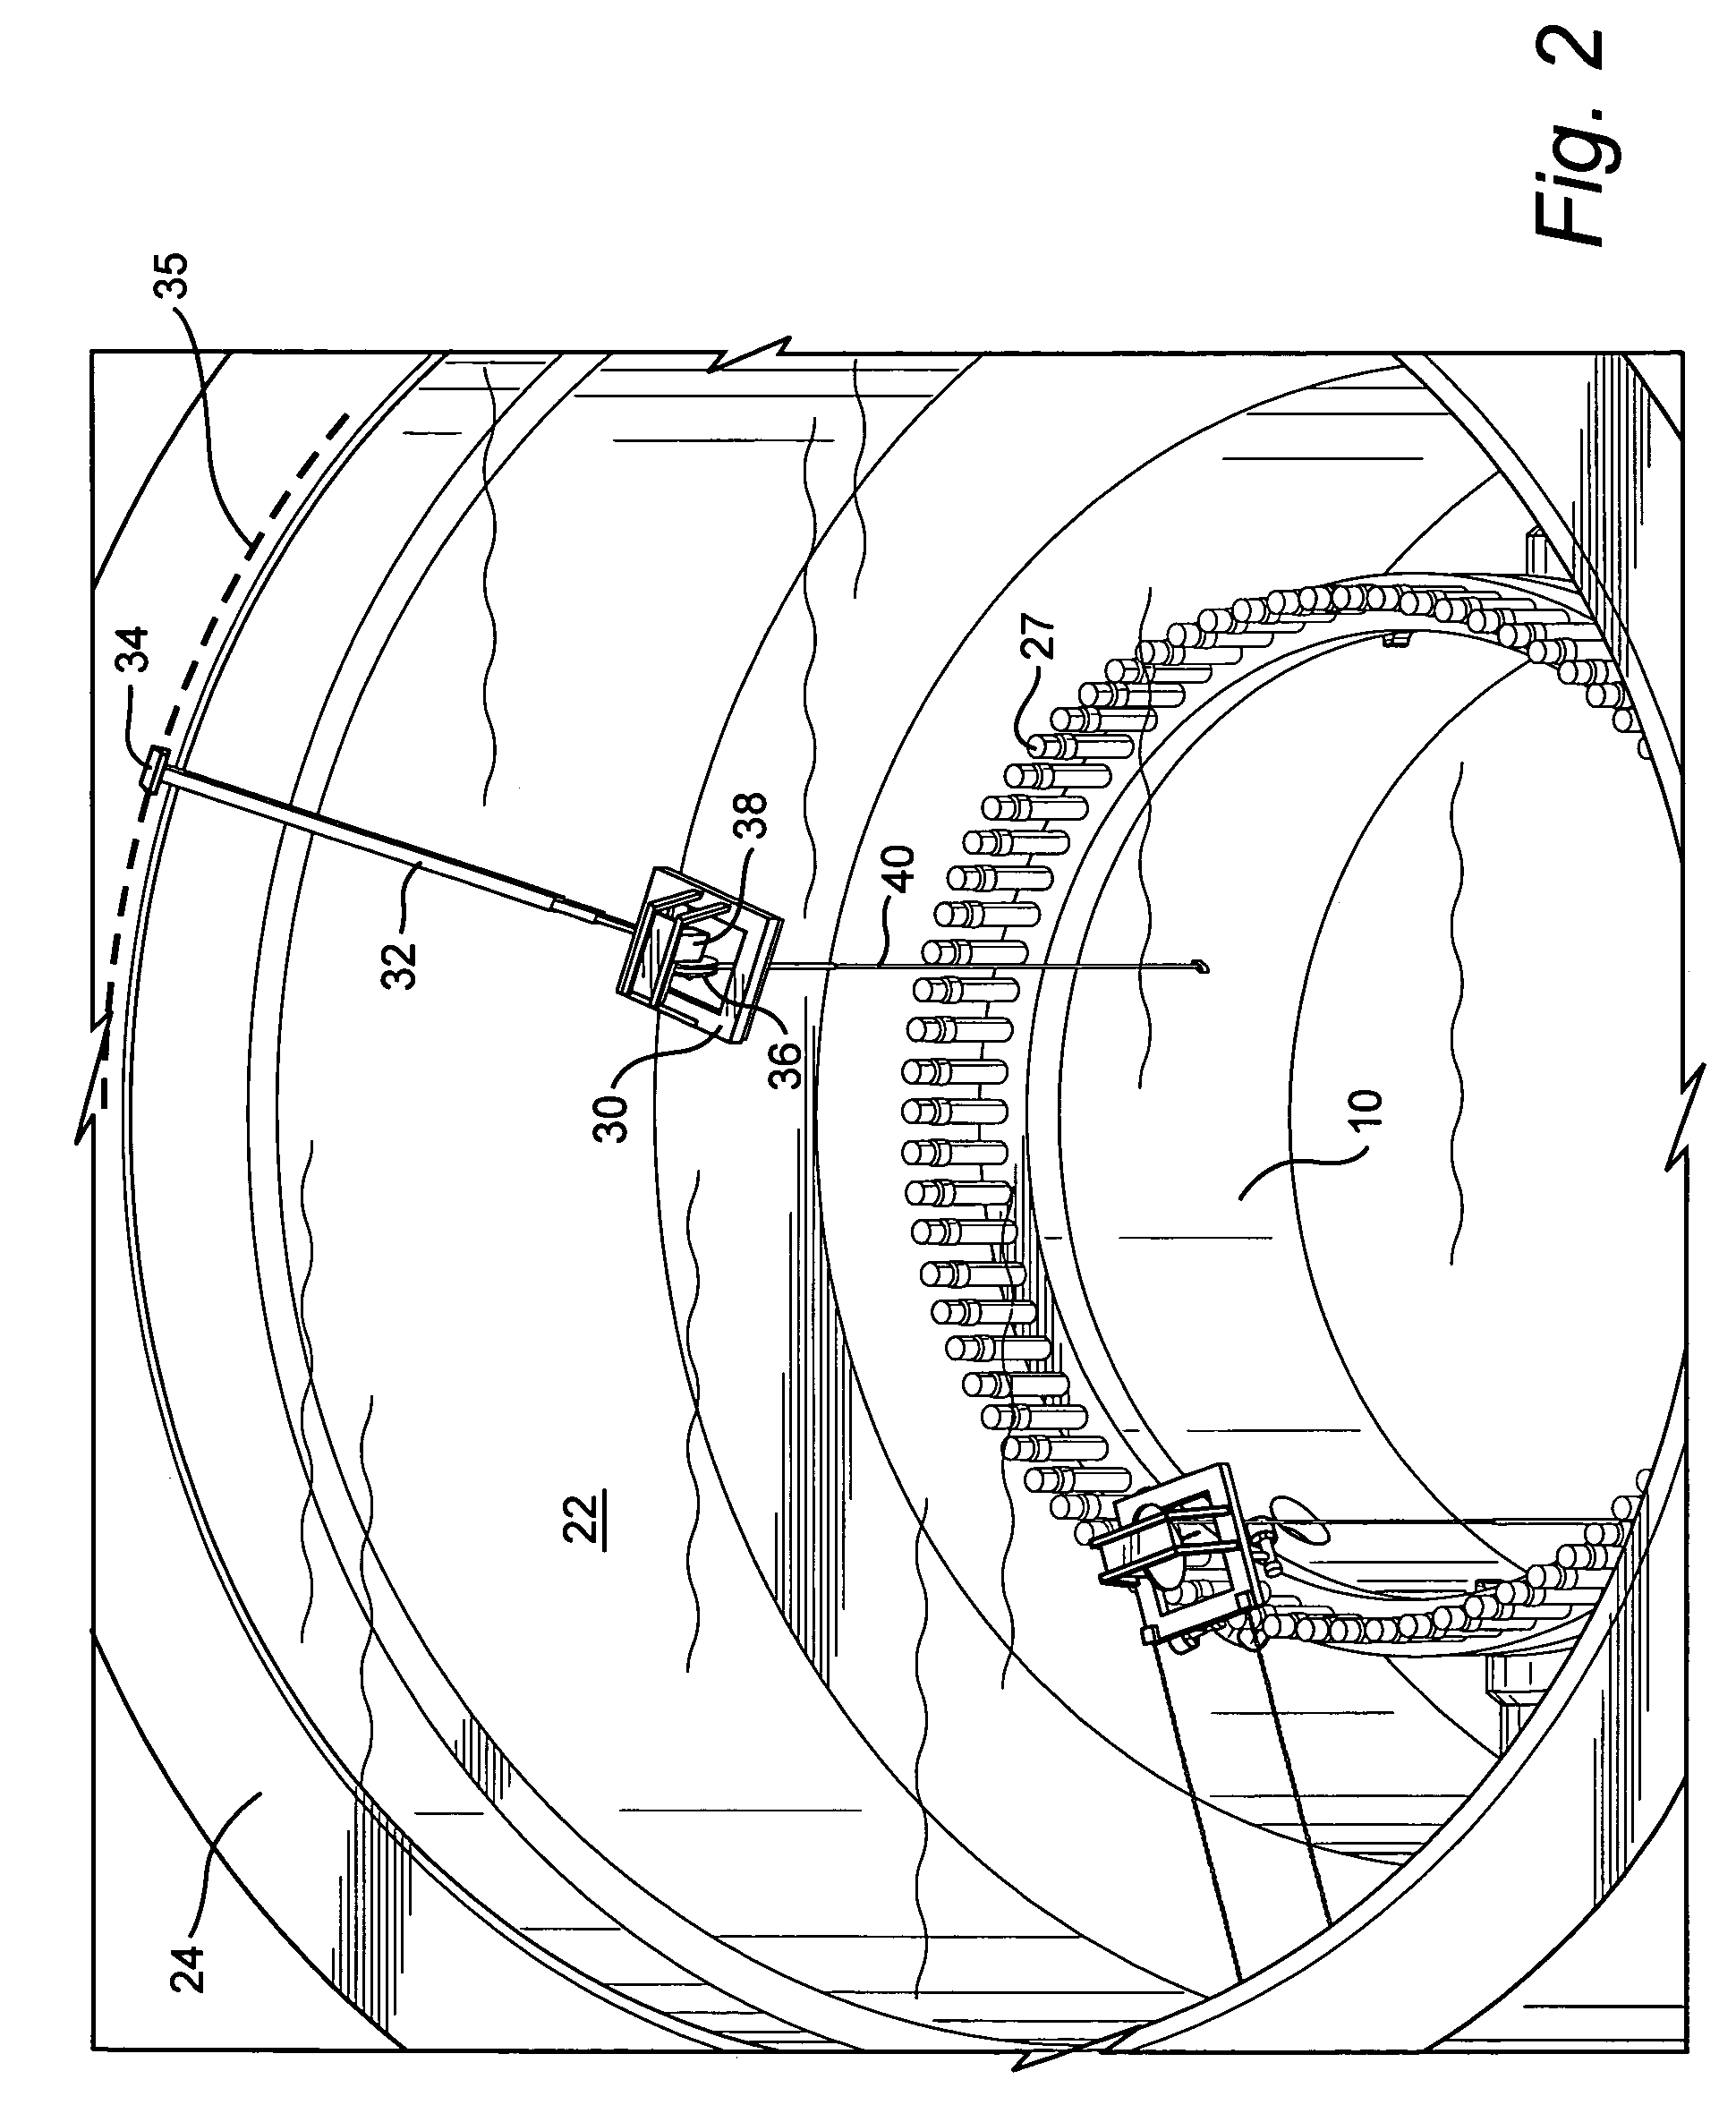 Method of inspecting or utilizing tools in a nuclear reactor environment